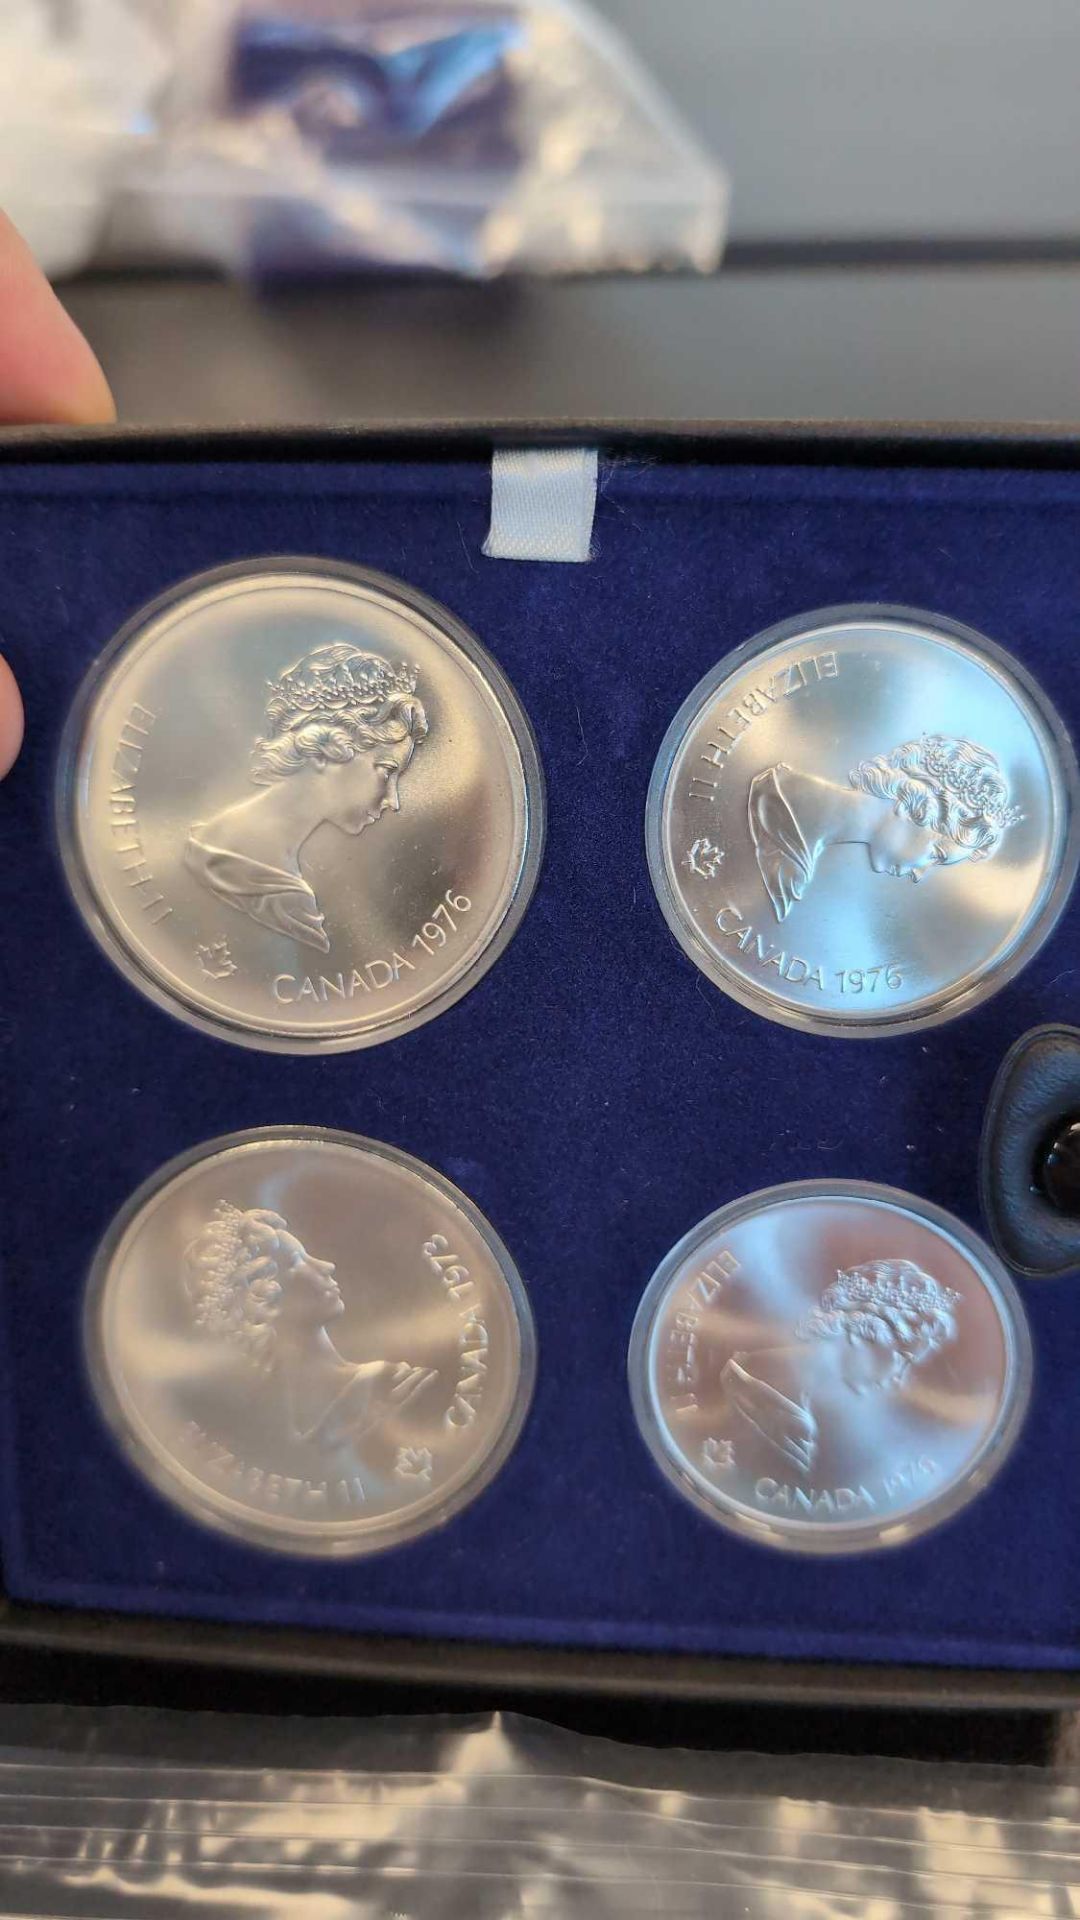 1976 Olympics 4 Coins Set Silver Coins 4.32 ounces - Image 2 of 4